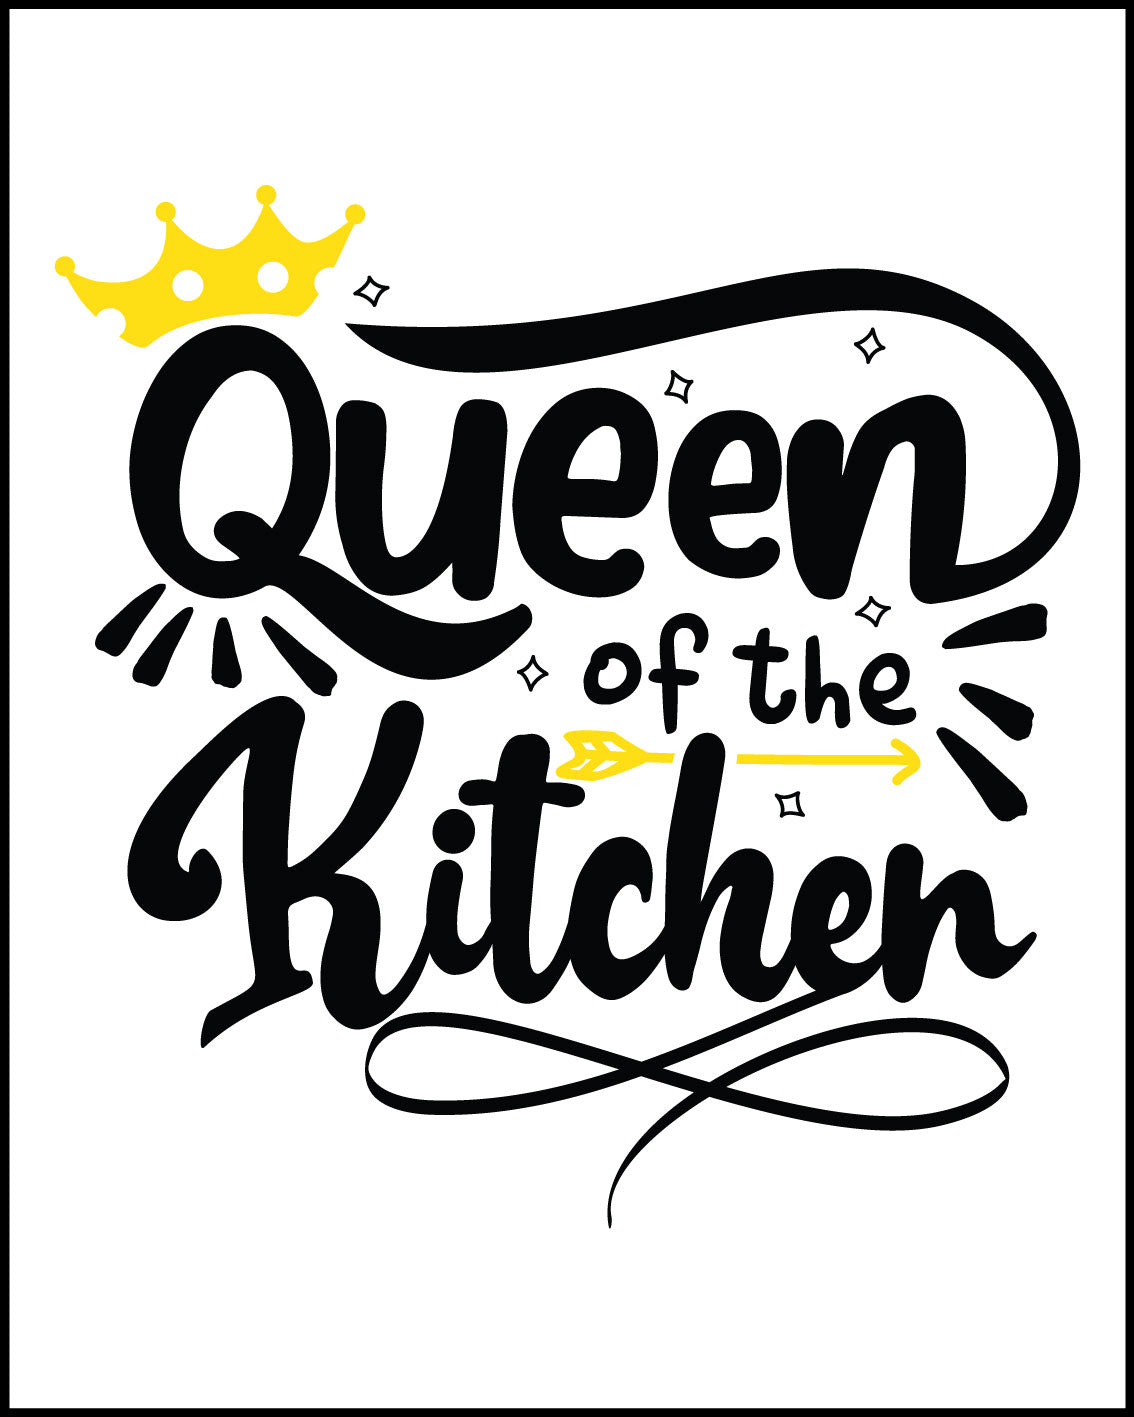 Queen of the kitchen Poster